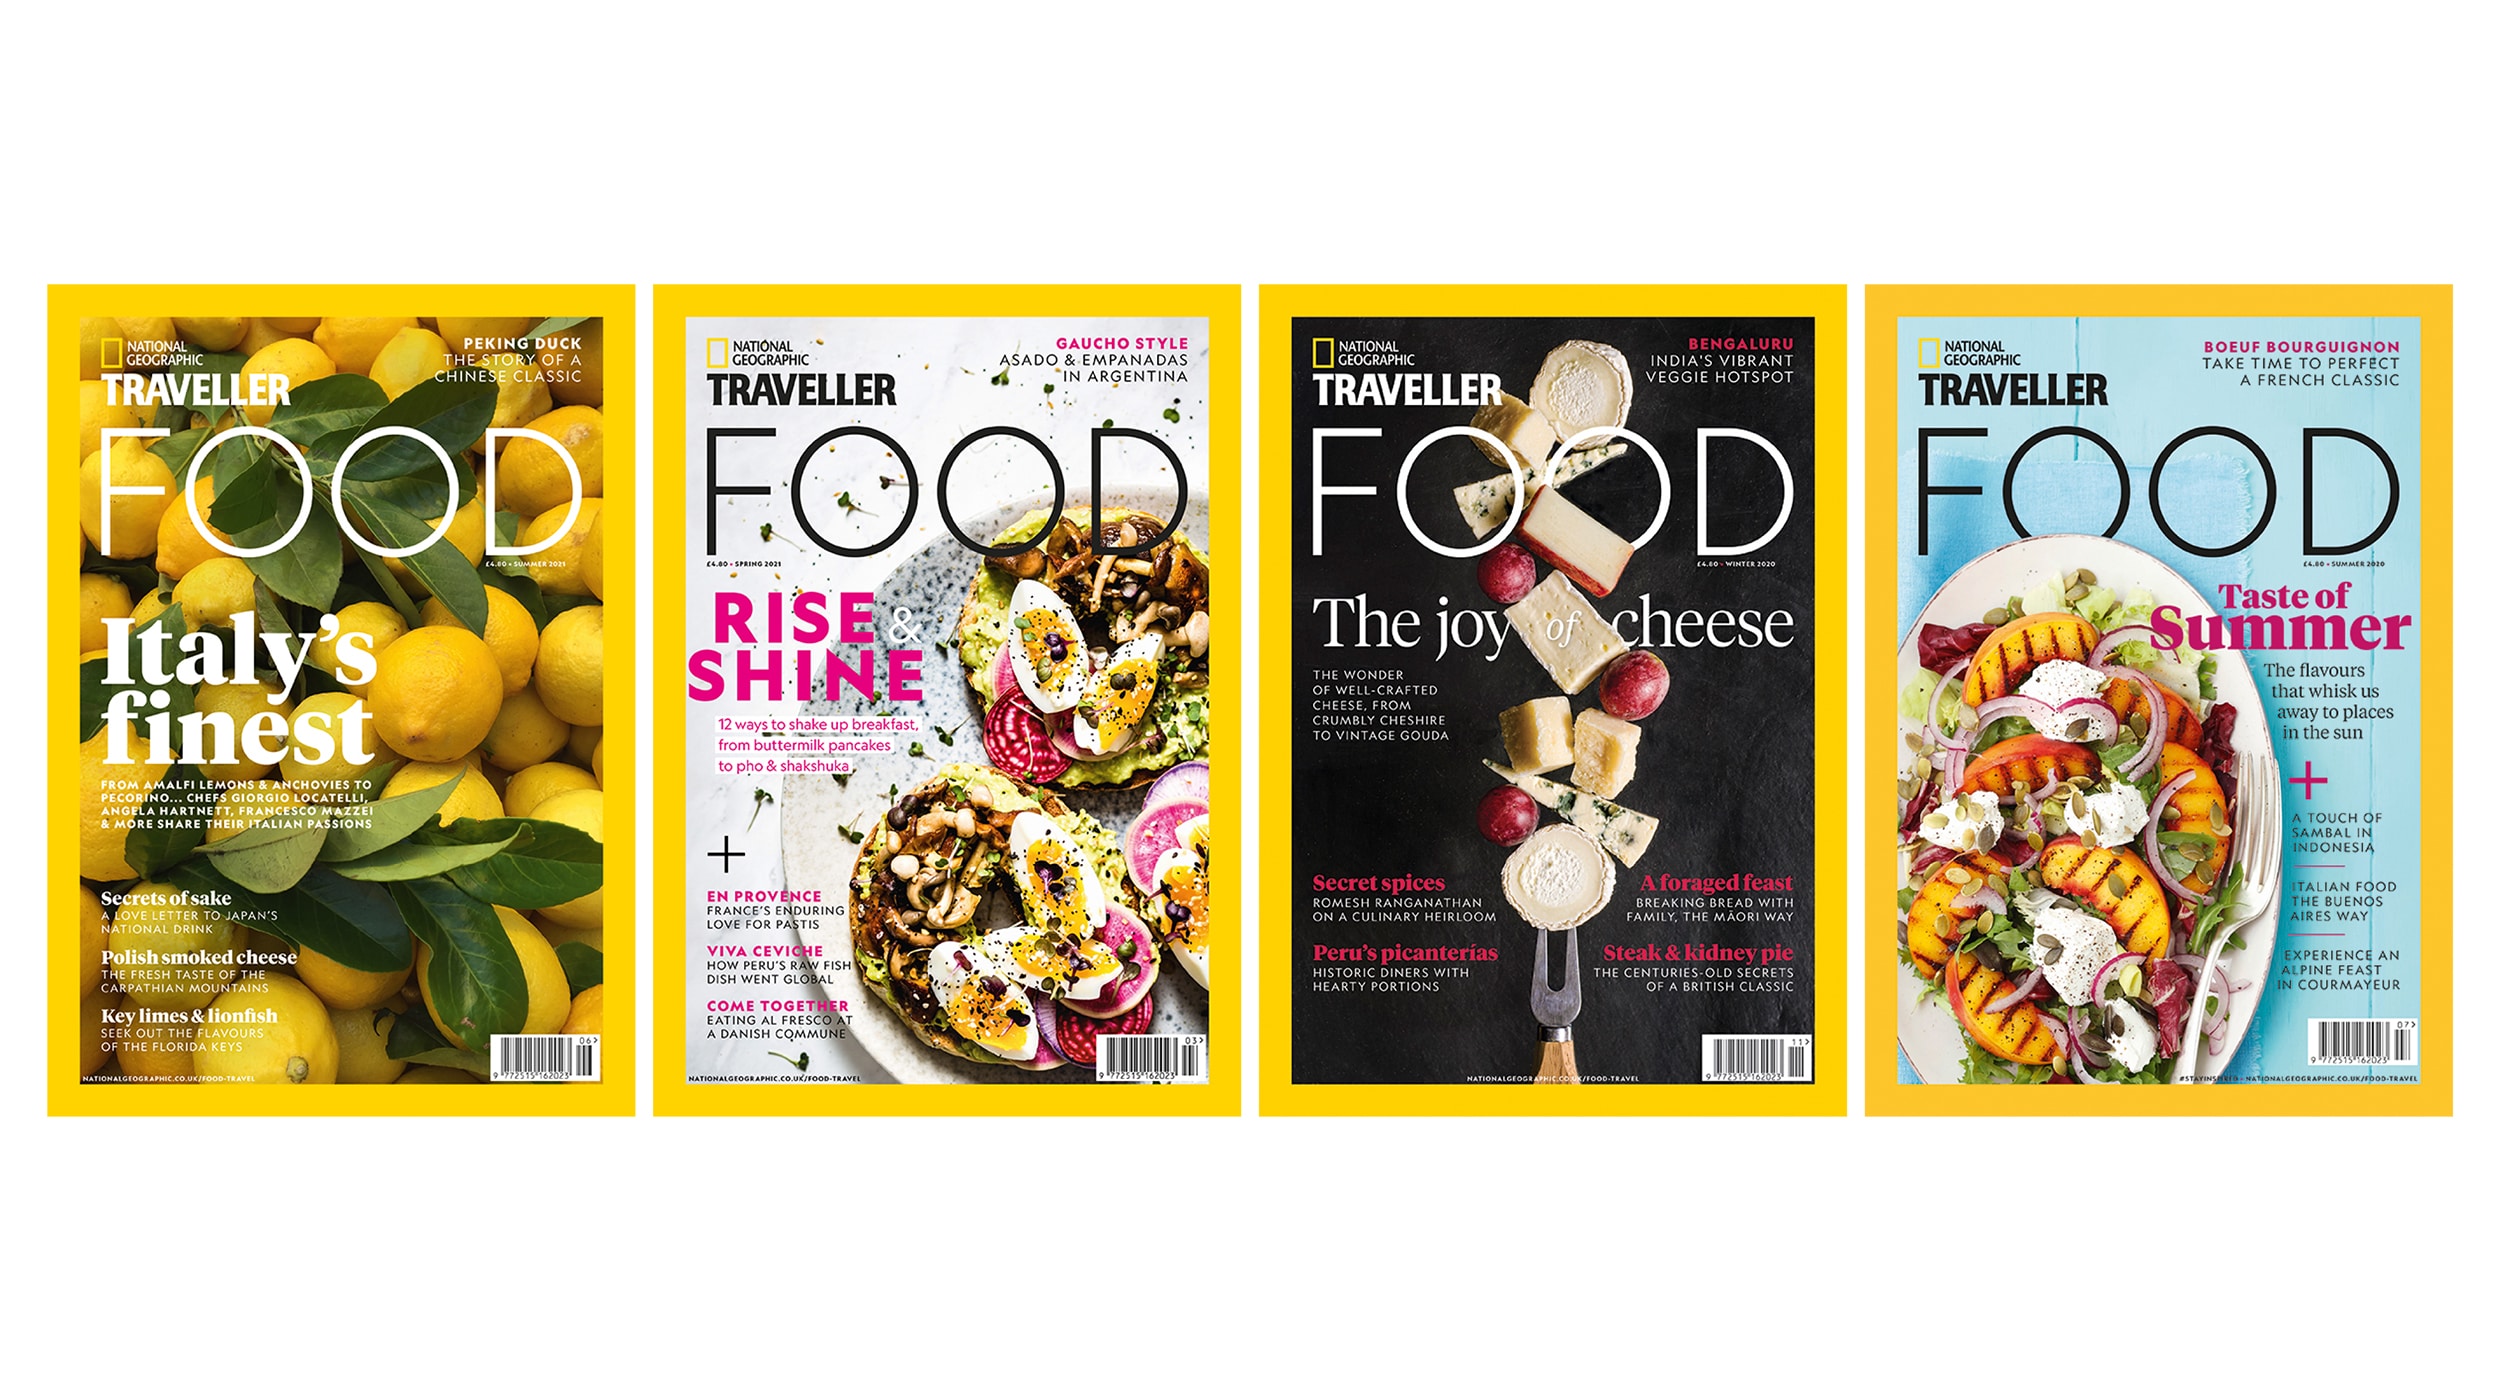 National Geographic Traveller (UK) Food covers.